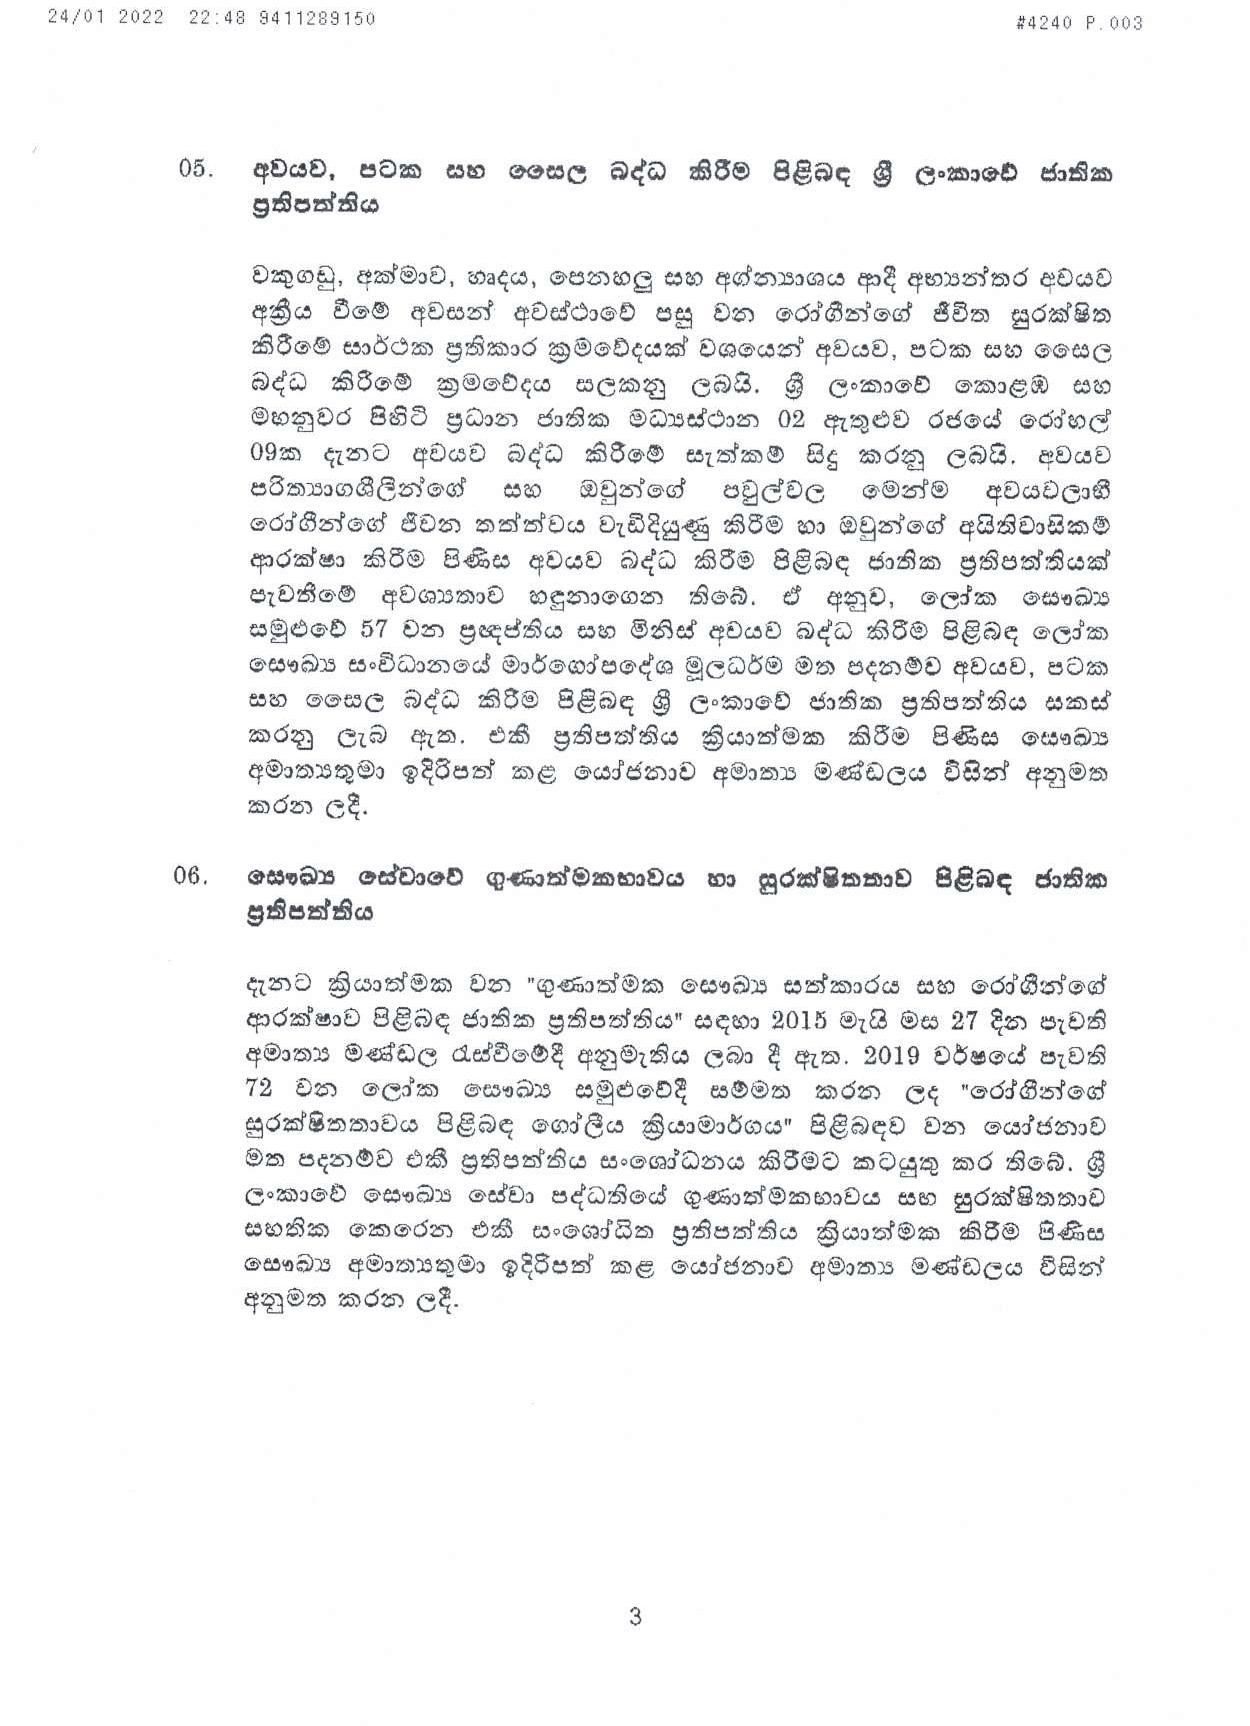 Cabinet Decision on 24.01.2022 page 003